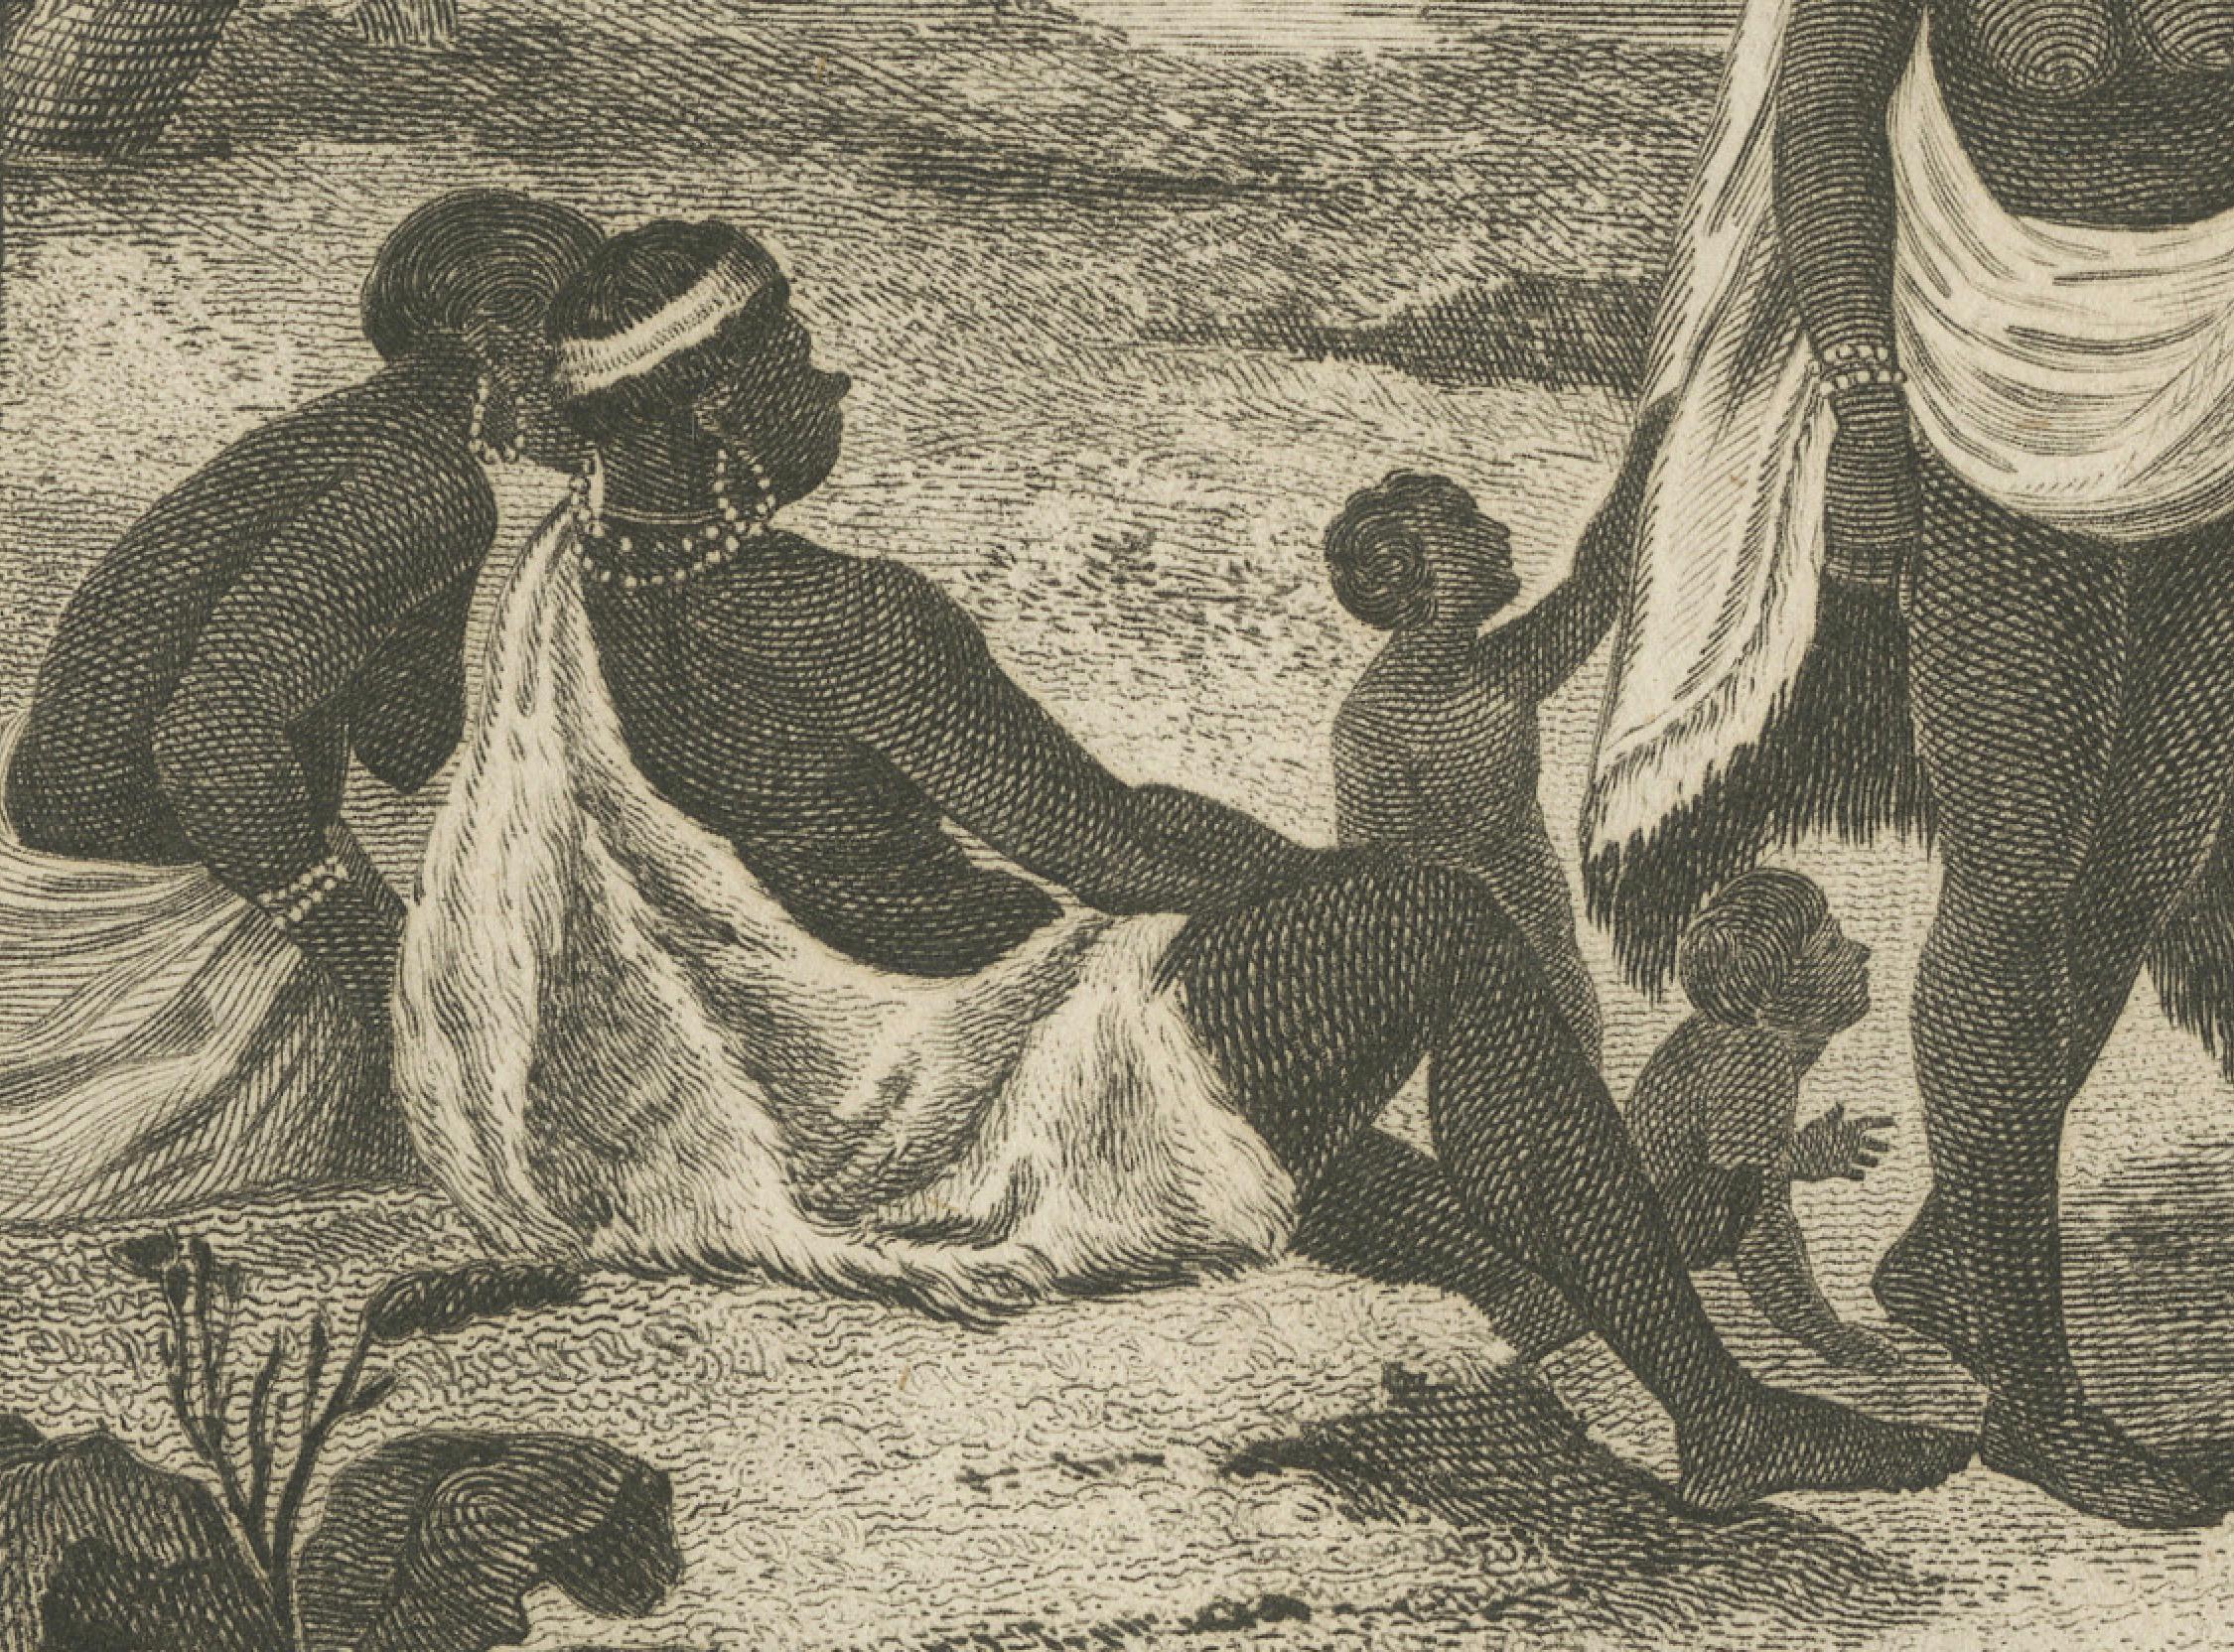 Engraved The Khoikhoi of Southwestern Africa, Original Engraving of circa 1801 For Sale